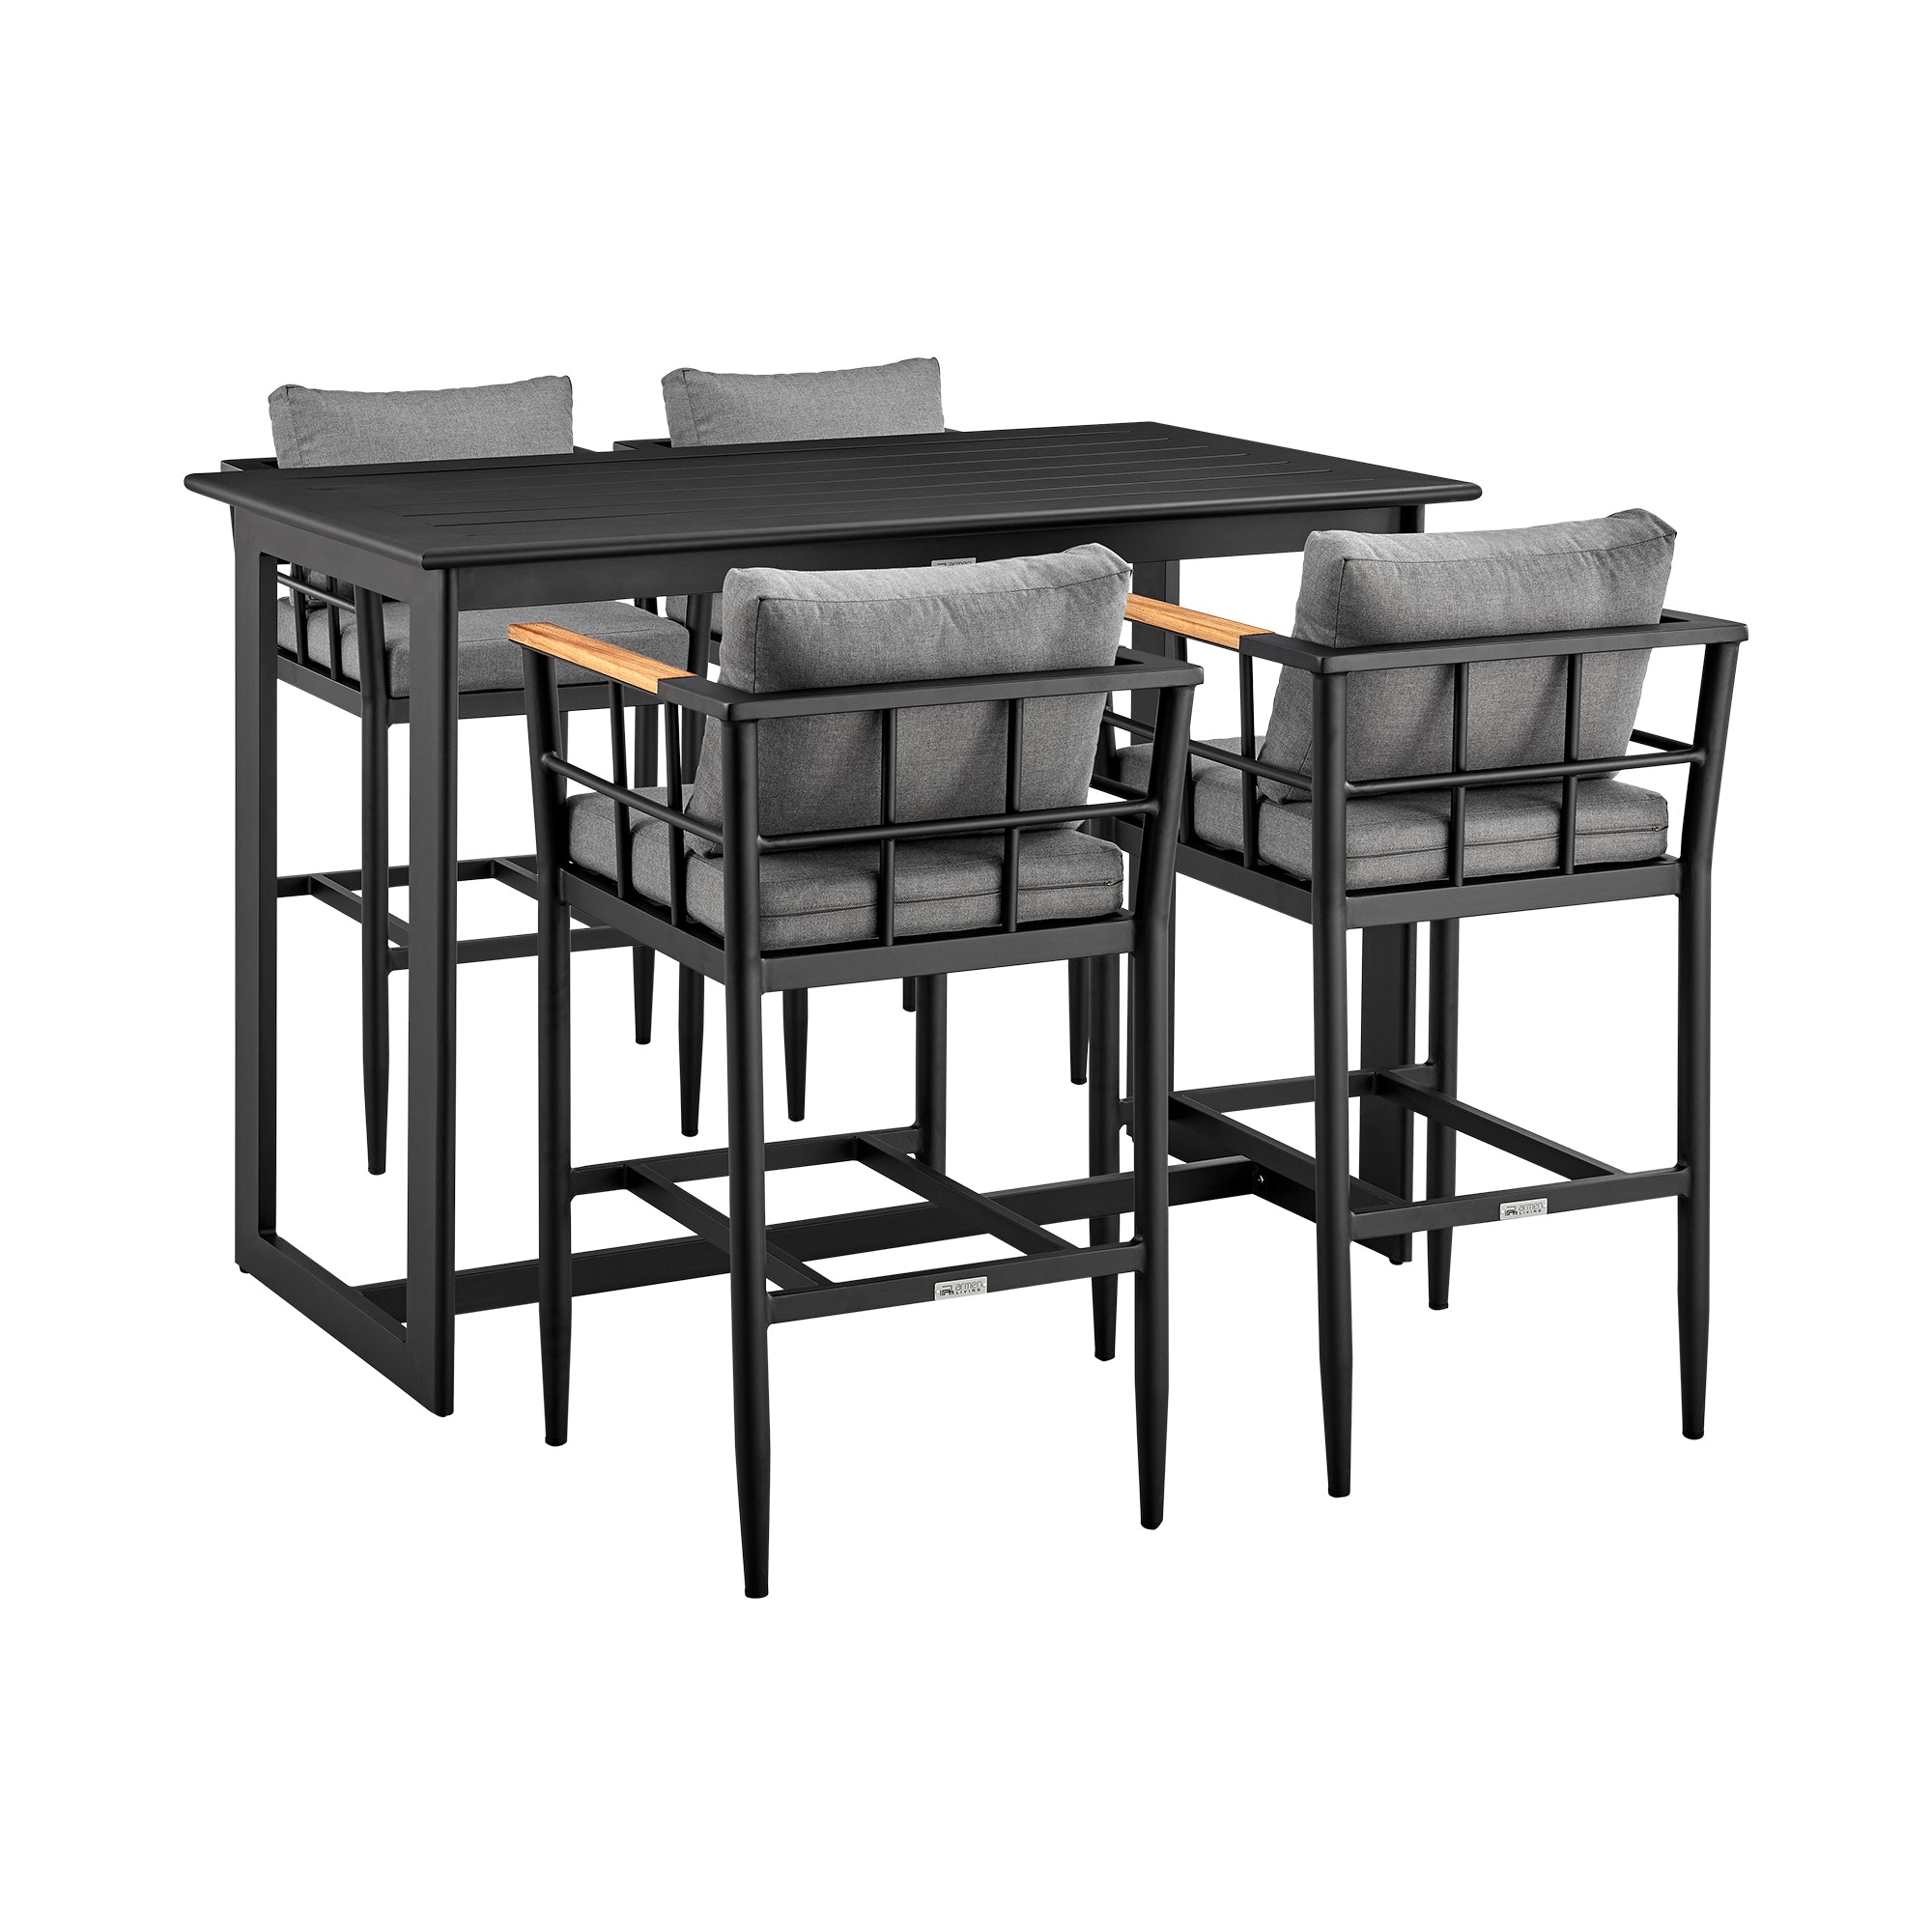 Armen Living - Wiglaf Outdoor Patio 5-Piece Bar Table Set in Aluminum with Grey Cushions - 840254333475